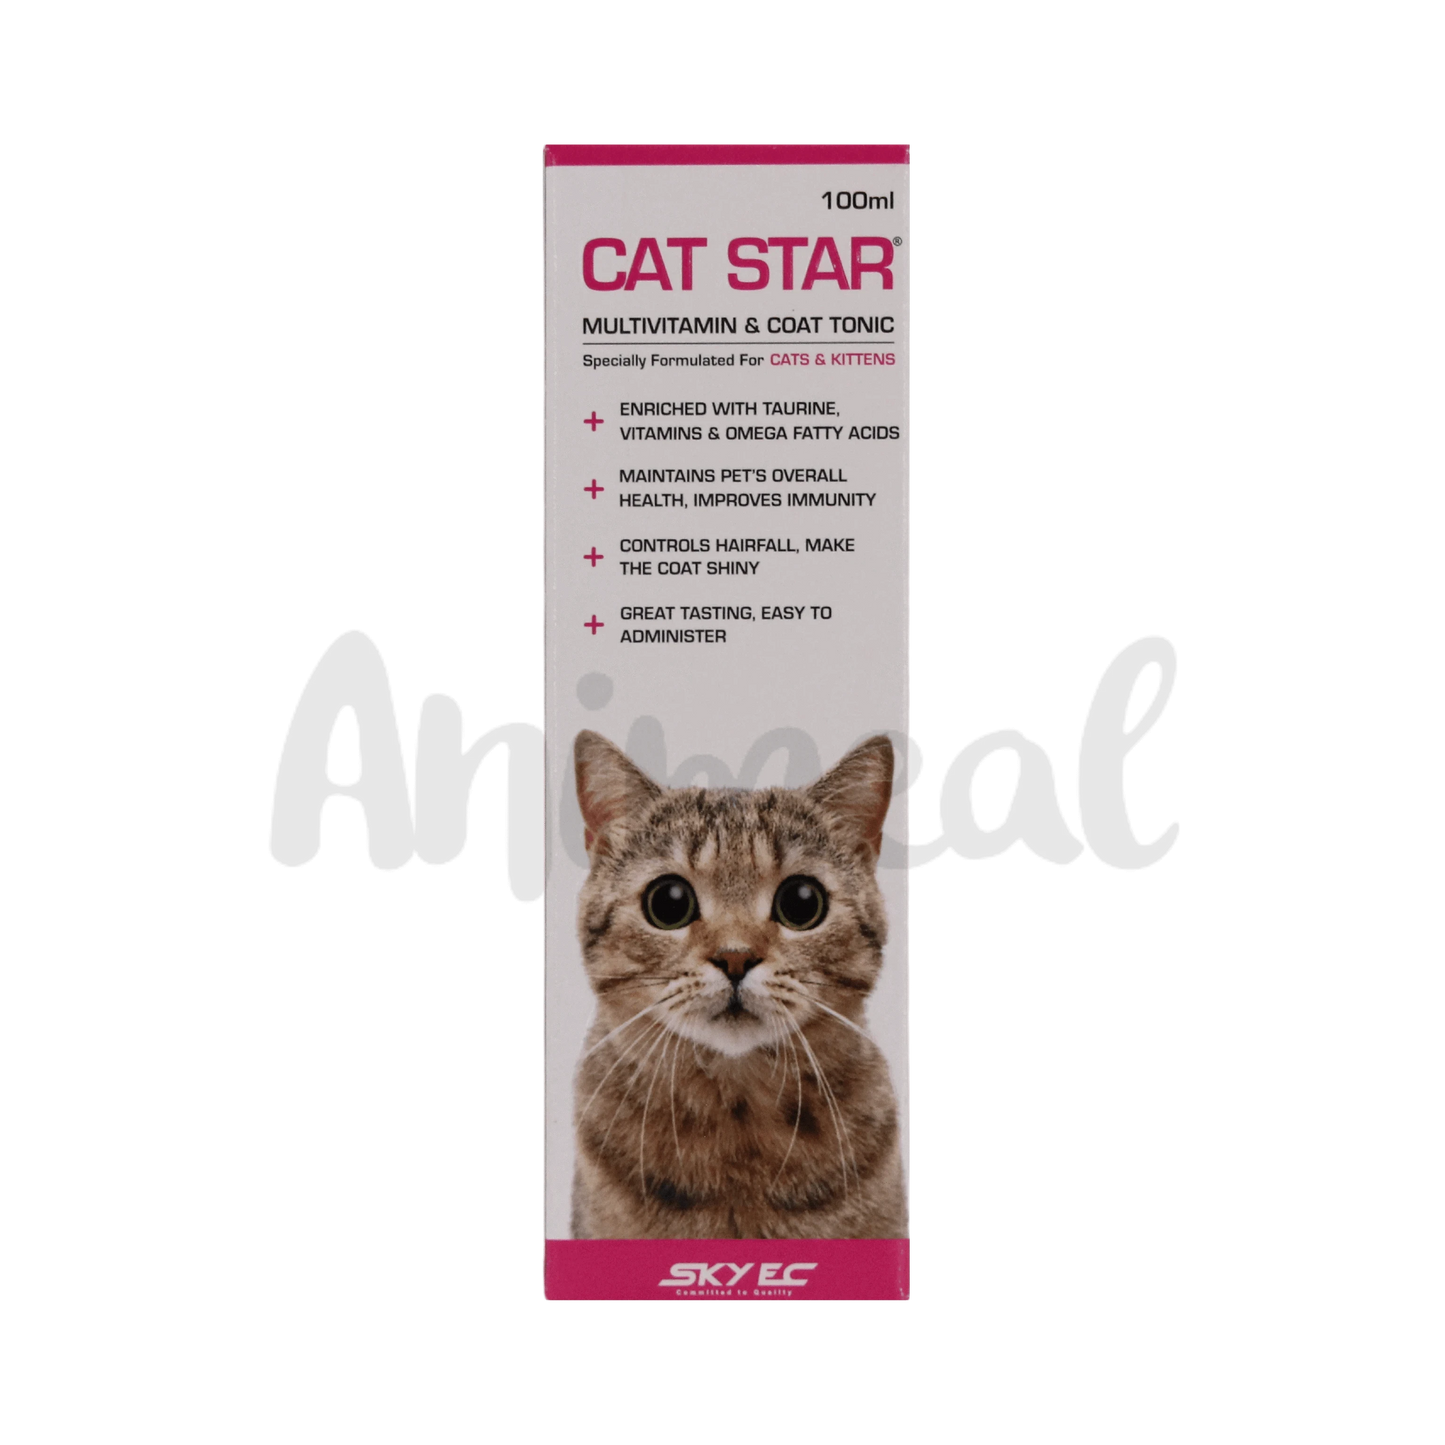 CAT STAR SYRUP (S) 100ML